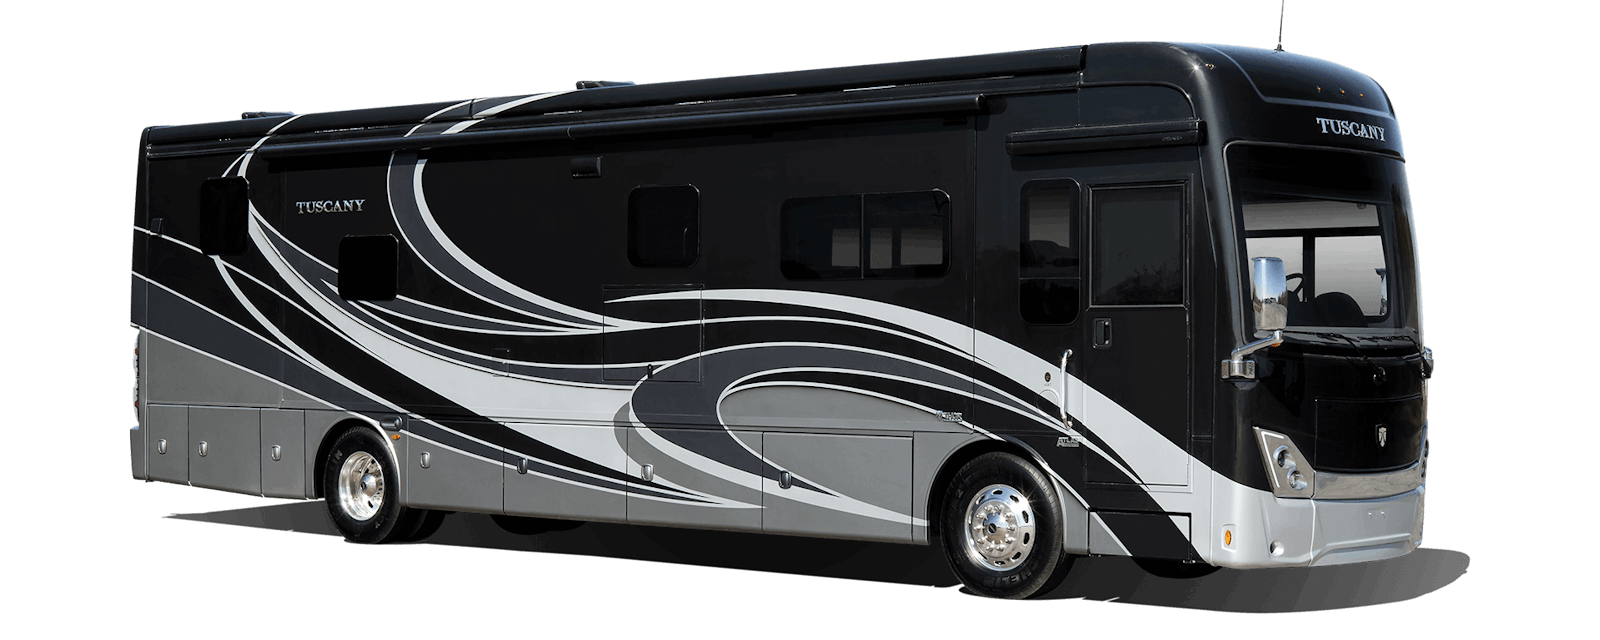 2022 Thor Tuscany Class A Diesel Pusher RV Stonegate Full Body Paint Exterior